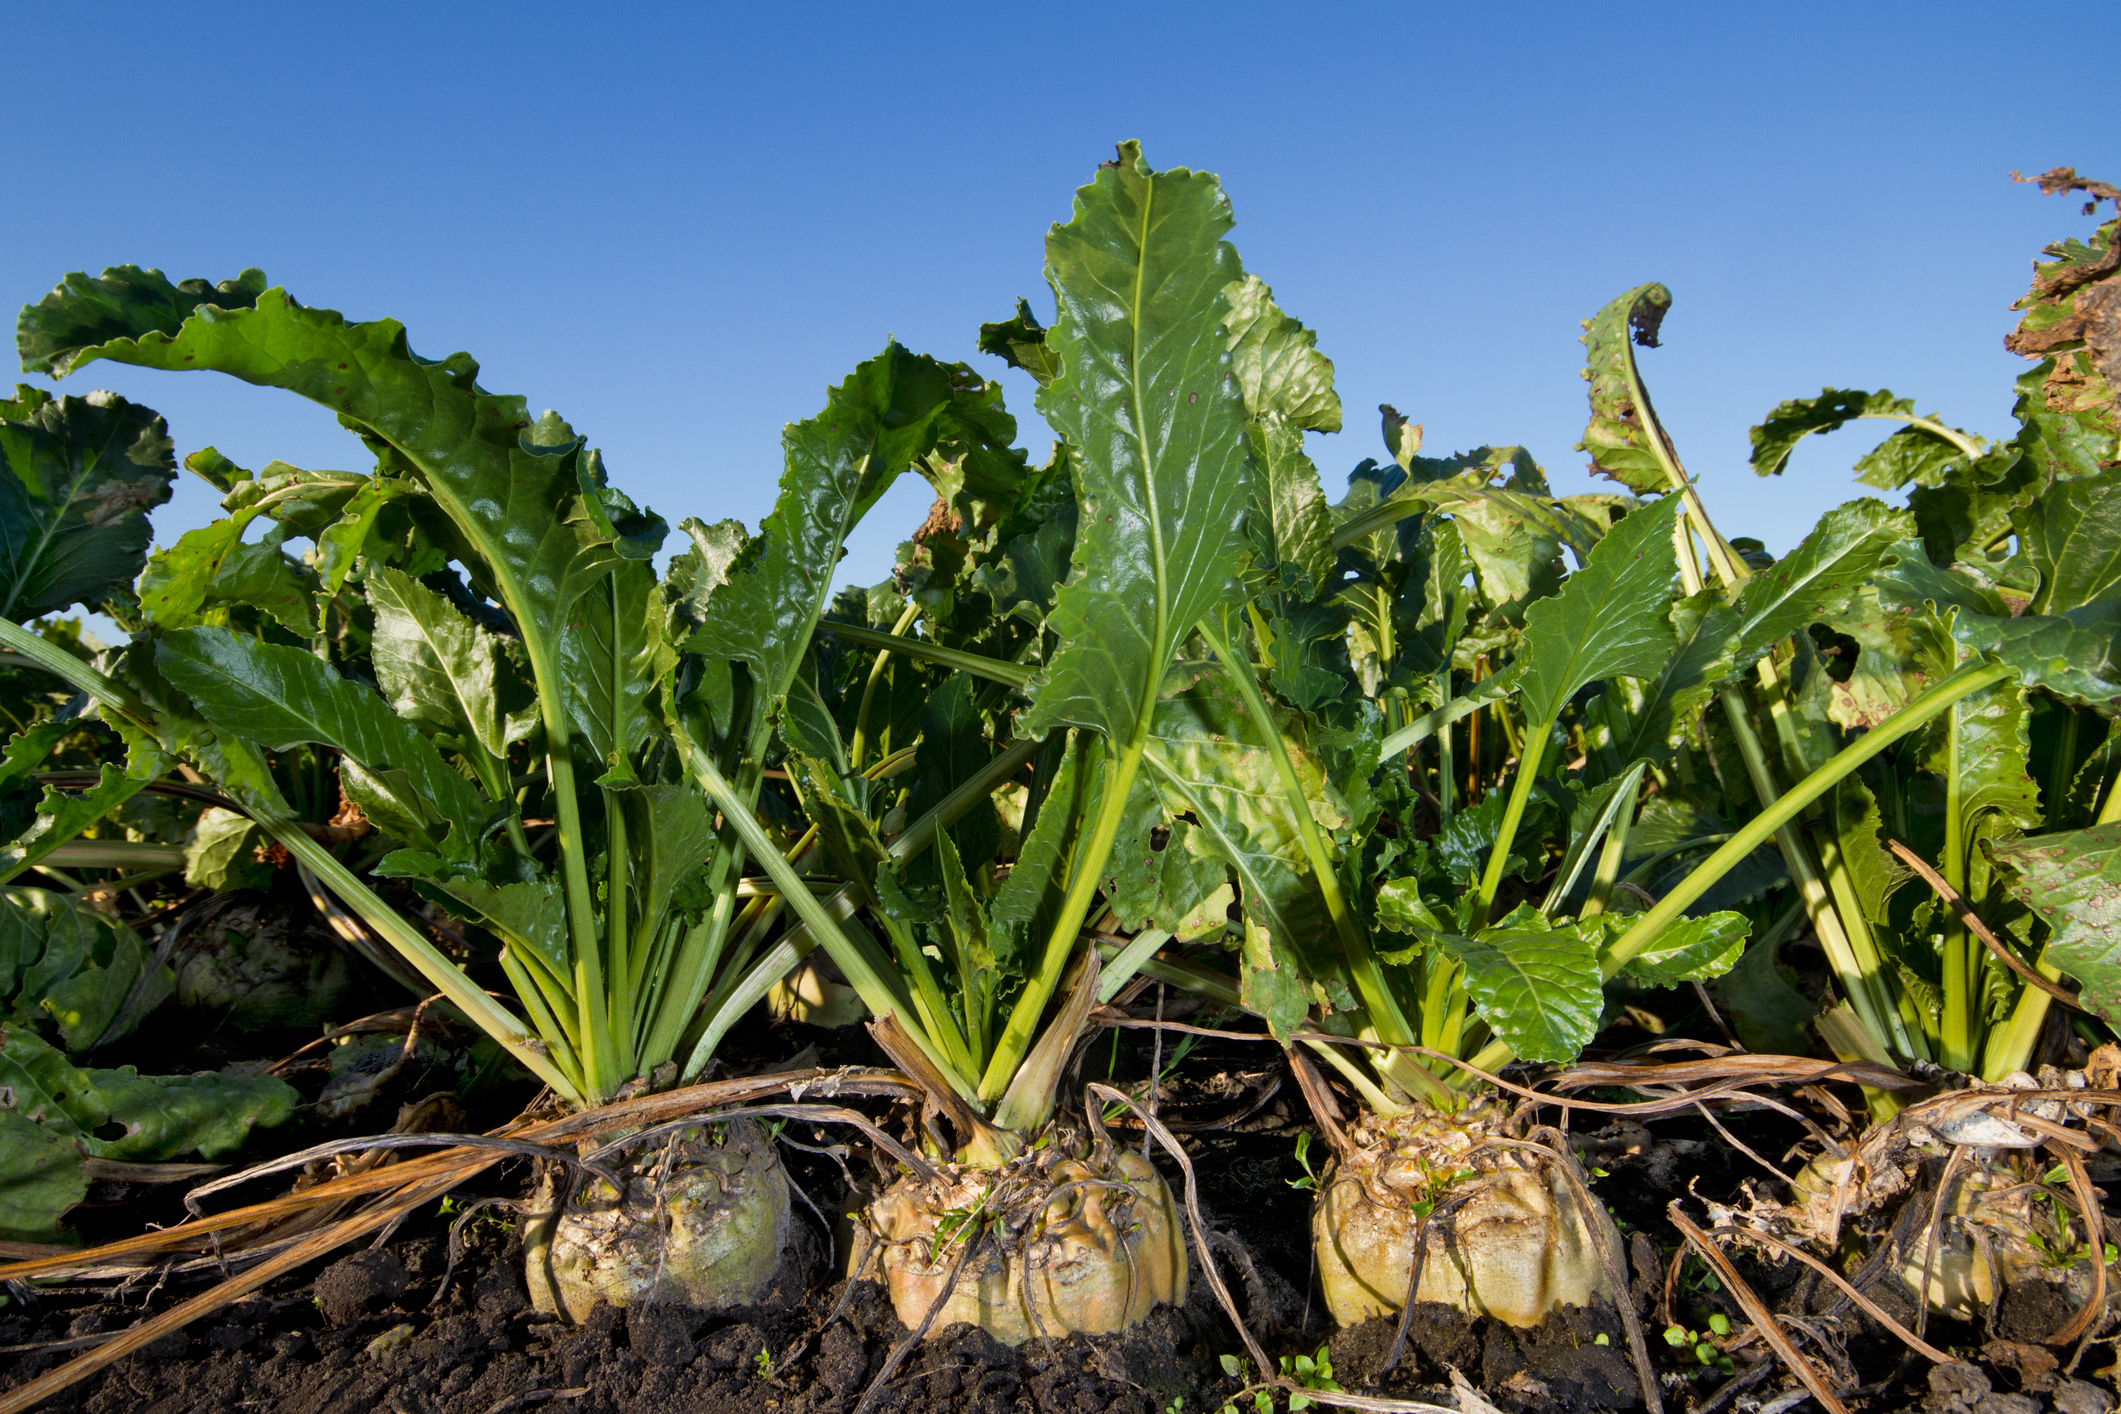 Unharvested sugarbeets can be a valuable source of nitrogen credits as part of a nutrient management strategy.